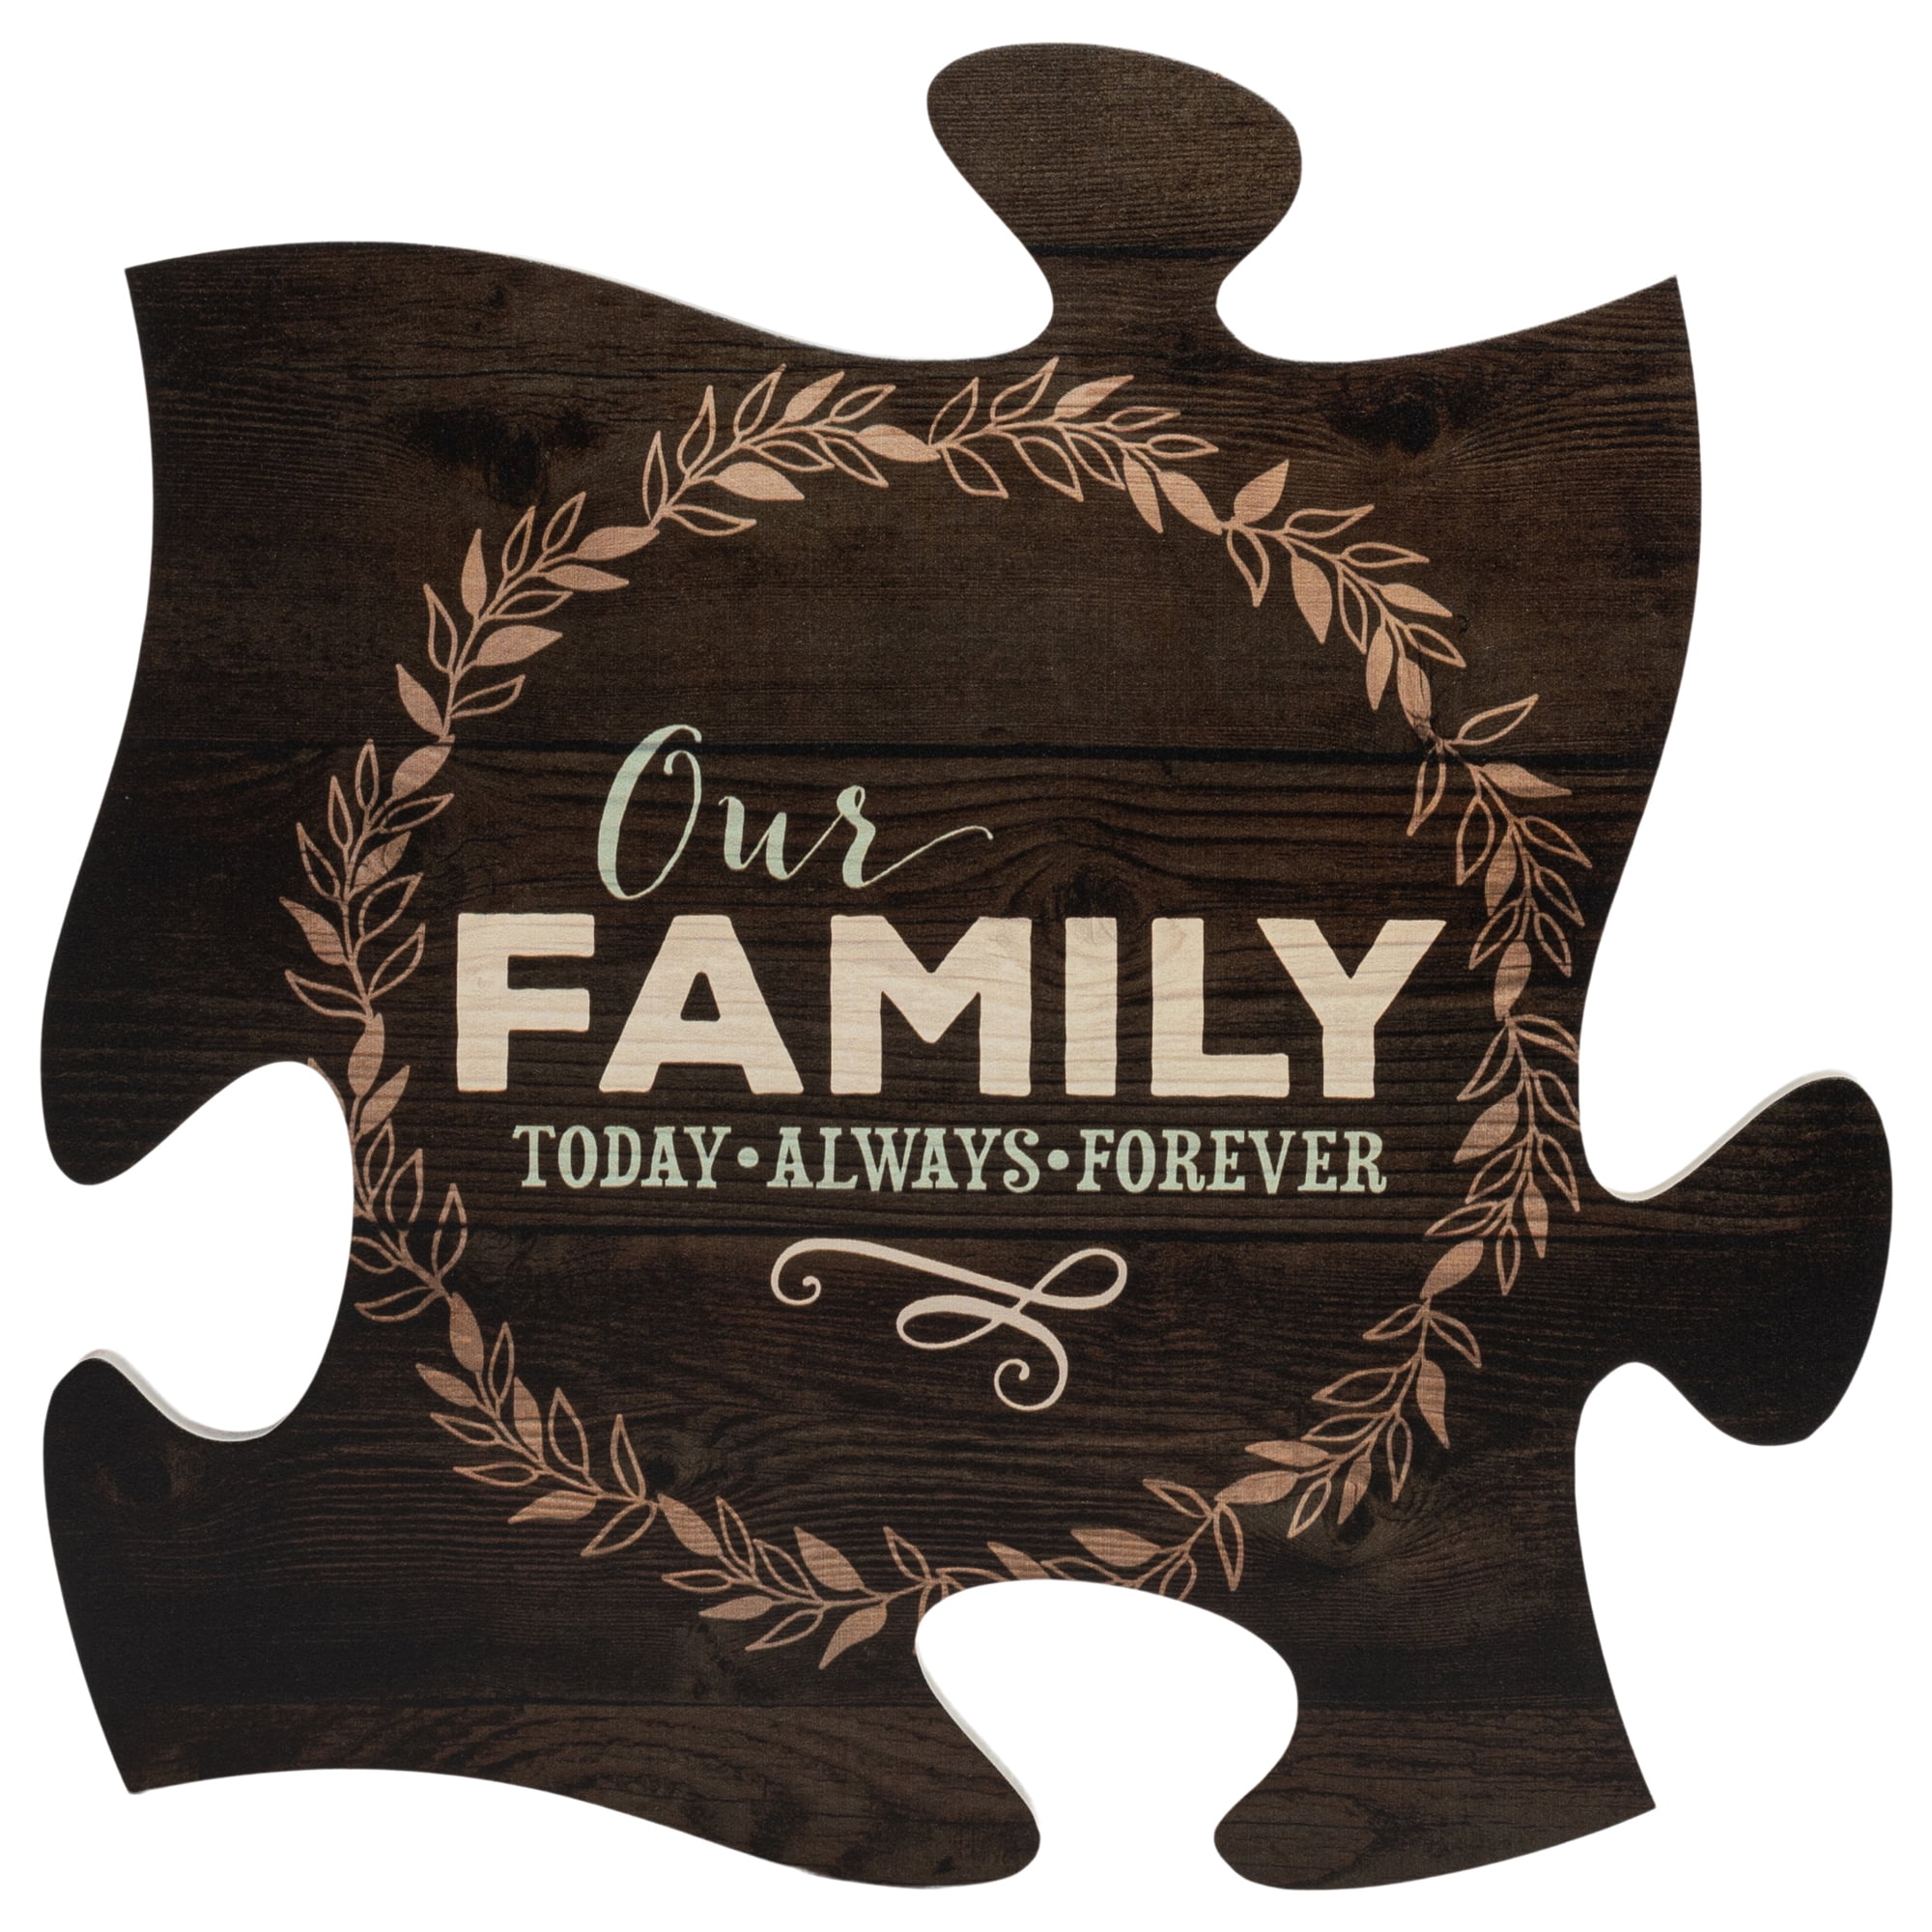 Graham Dunn Our Family Today Always Forever 12 x 12 Wood Wall Art Puzzle Piece Plaque P 